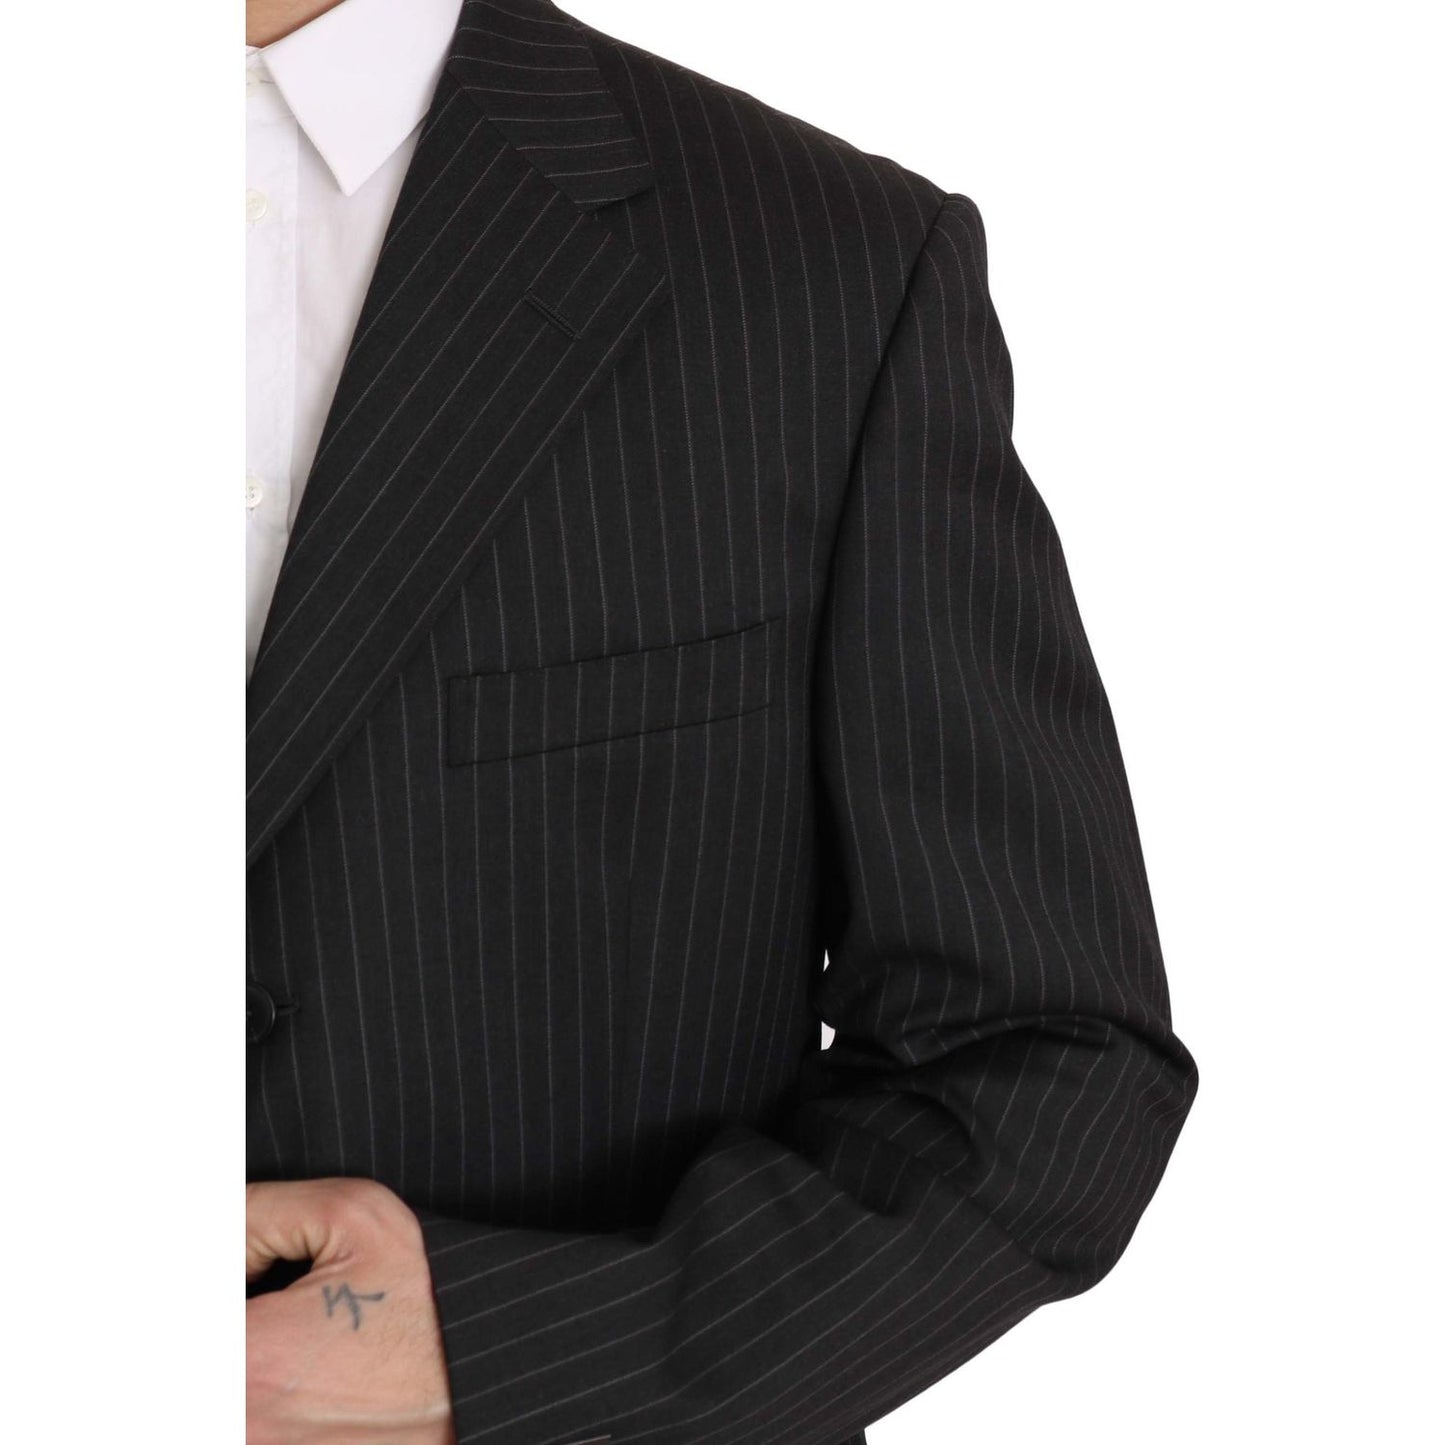 Z ZEGNA Elegant Black Striped Wool Suit black-striped-two-piece-3-button-100-wool-suit Suit IMG_7800-scaled.jpg